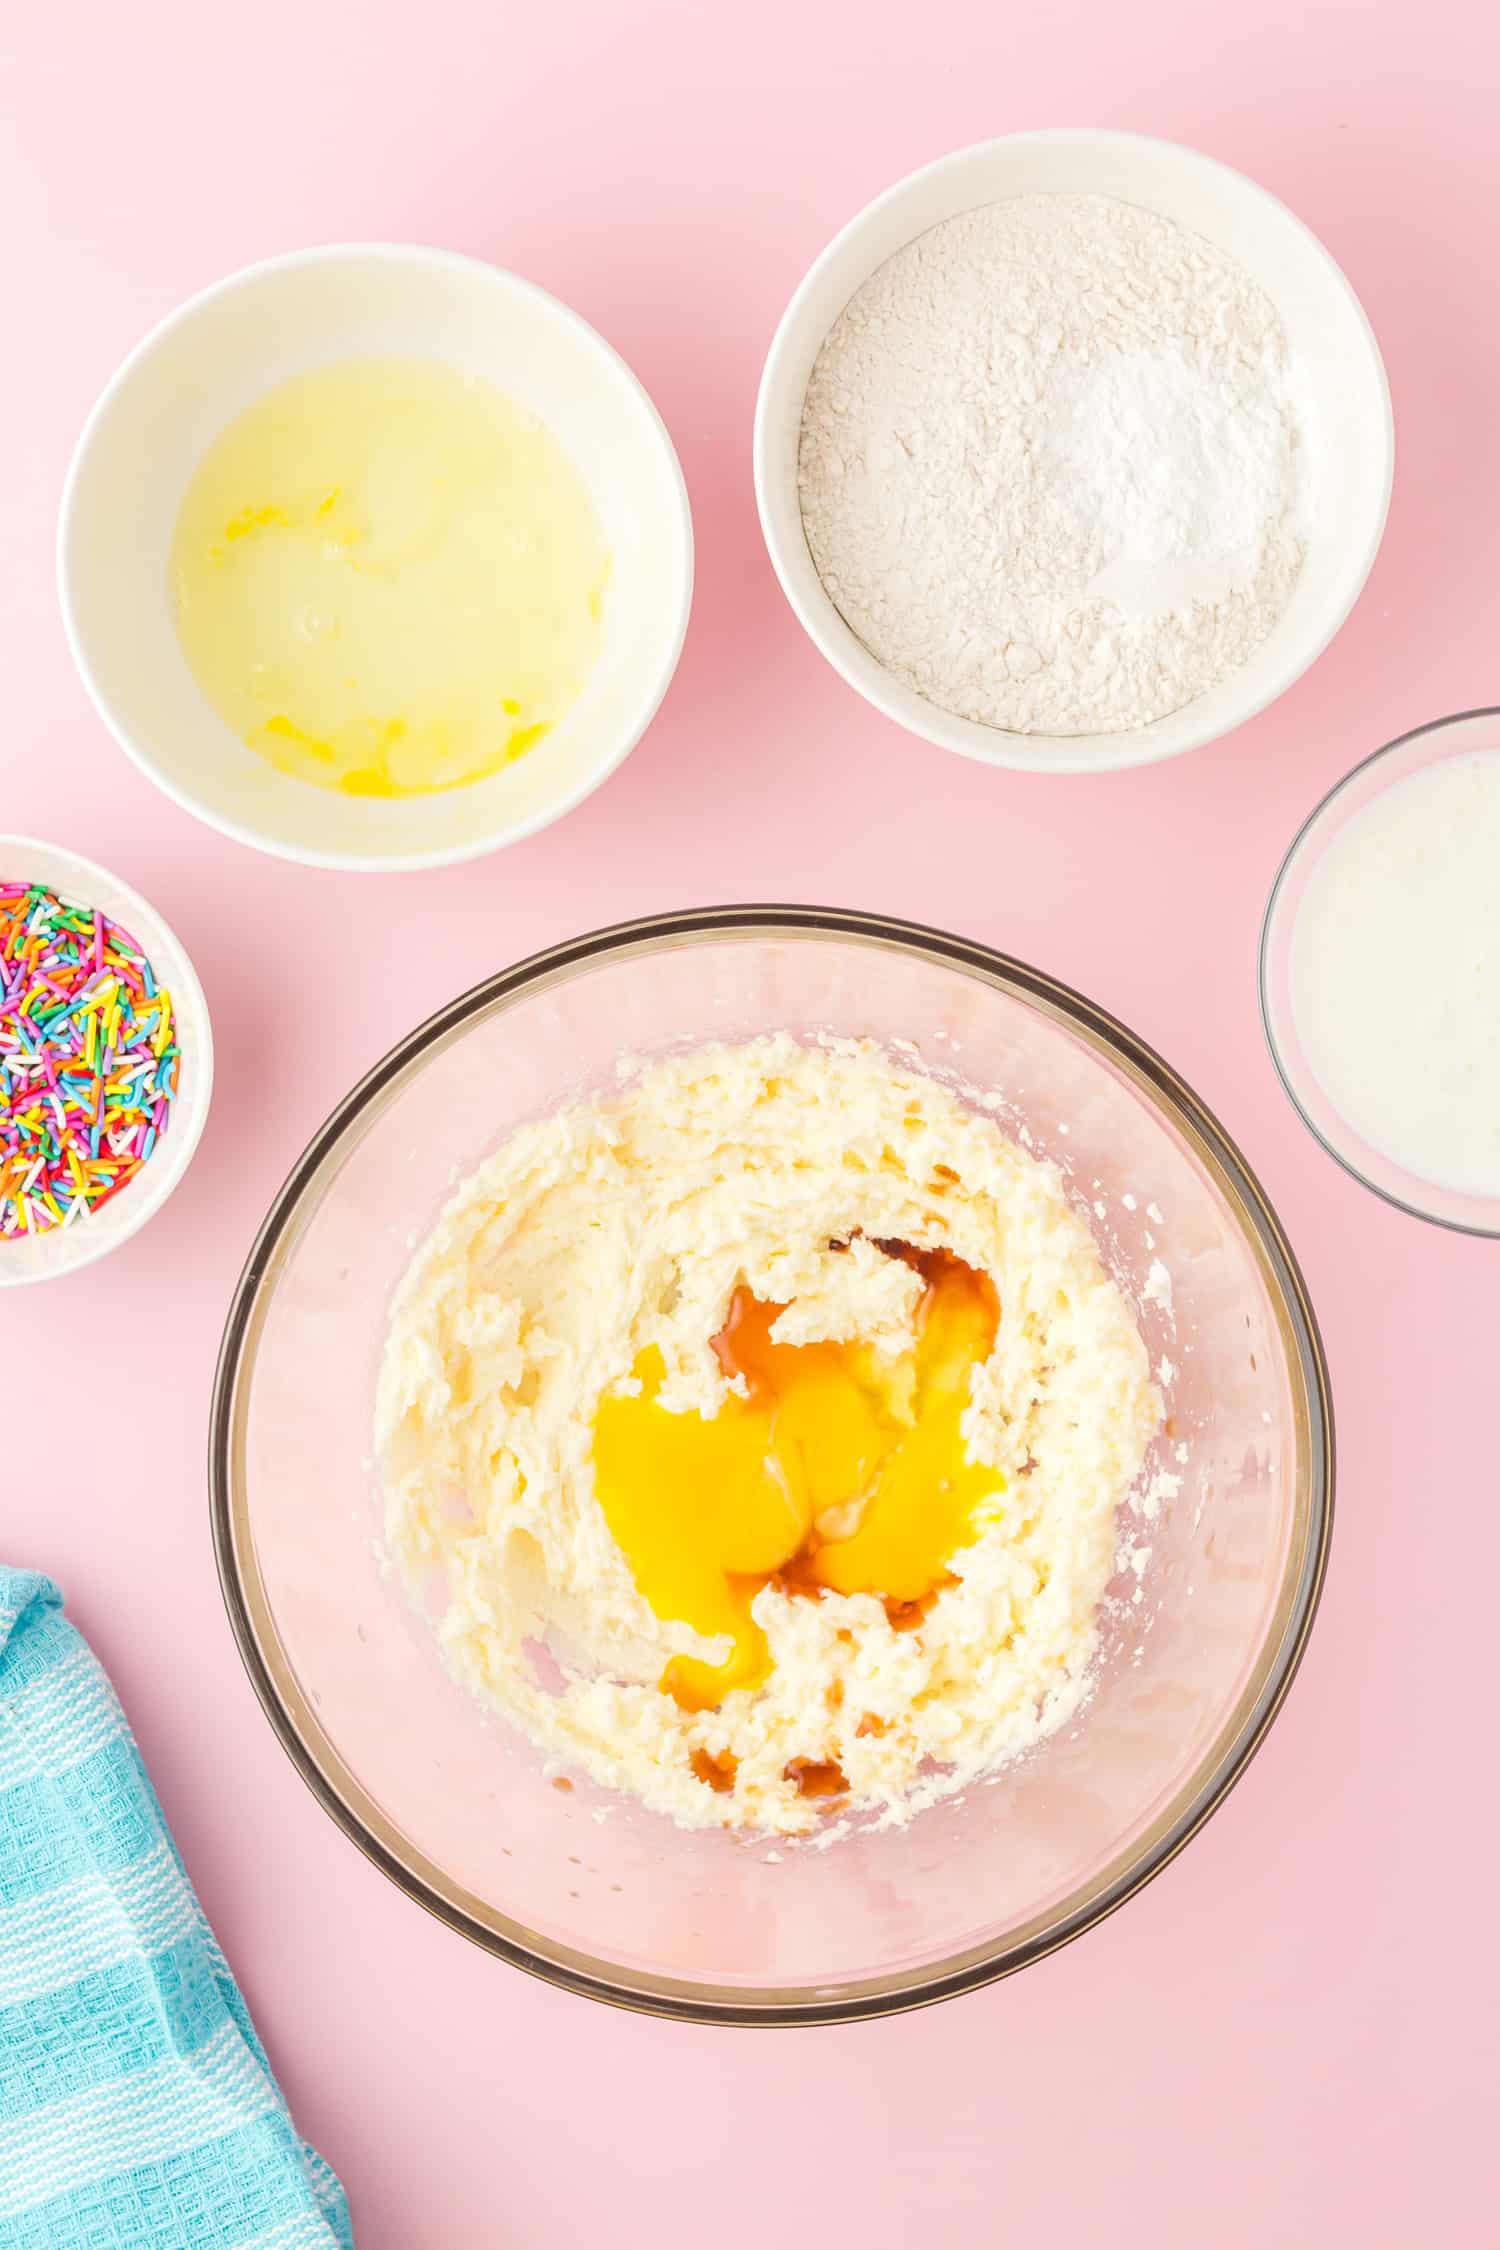 egg yolks and other wet Funfetti cupcakes ingredients in glass bowl on pink background